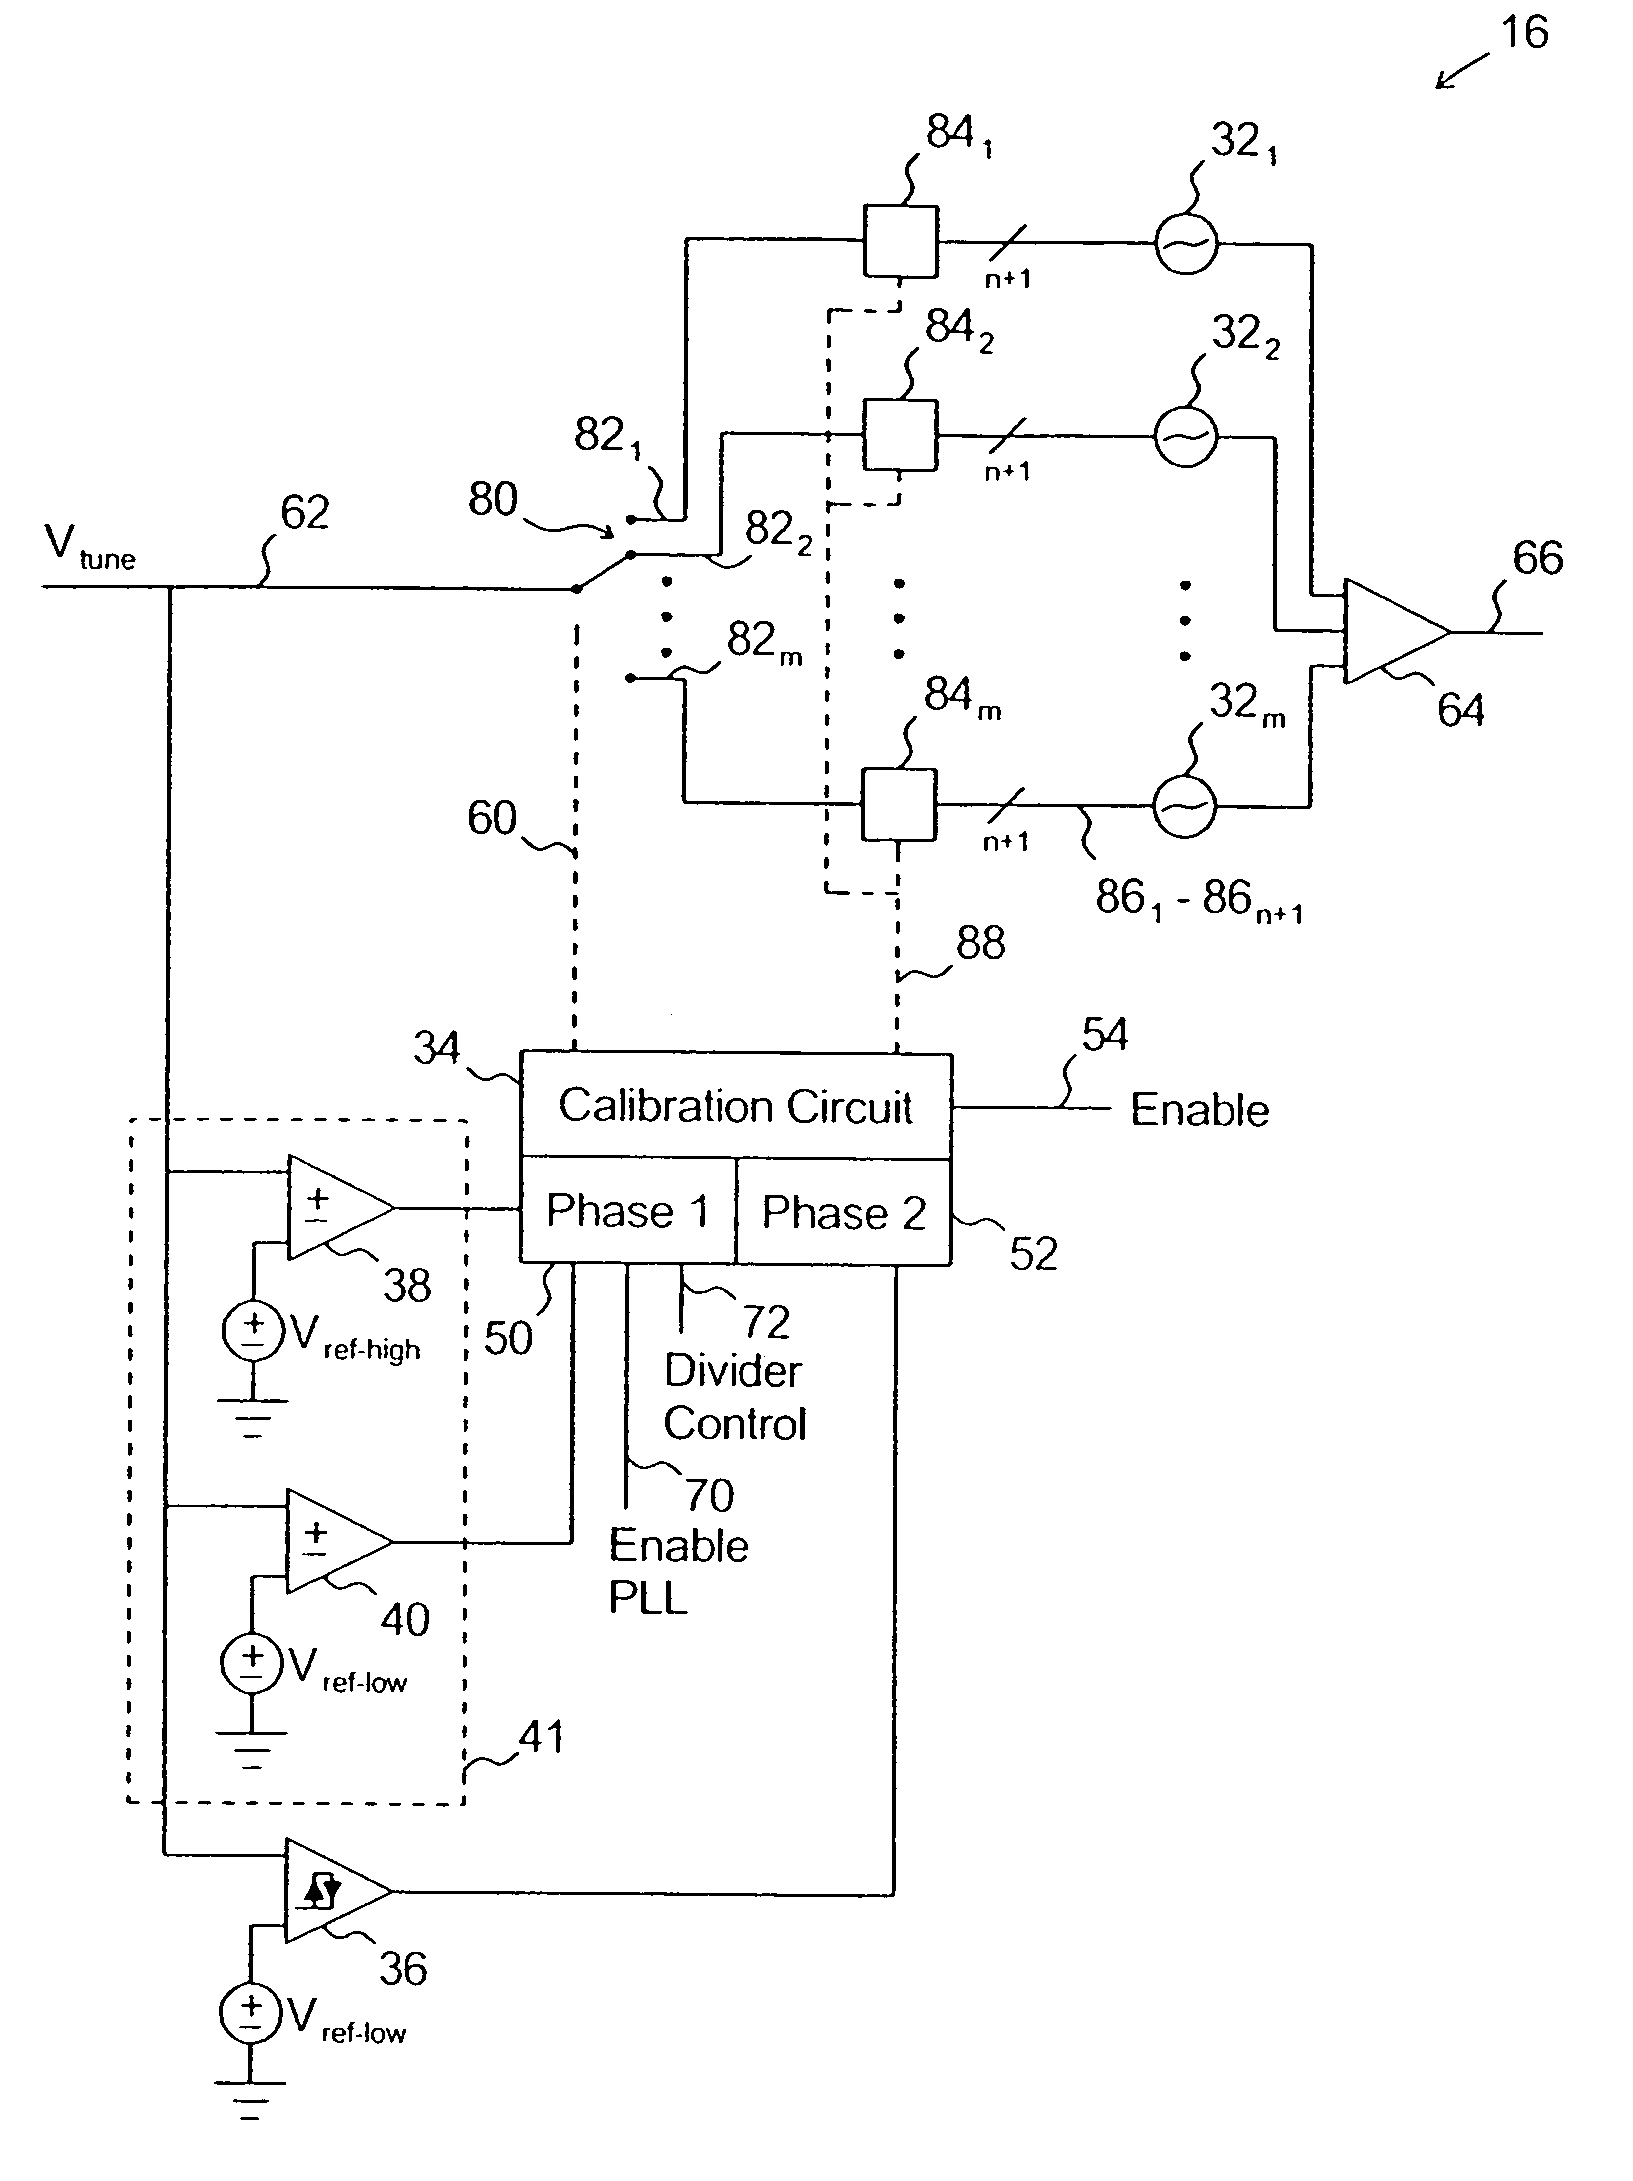 On-chip VCO calibration